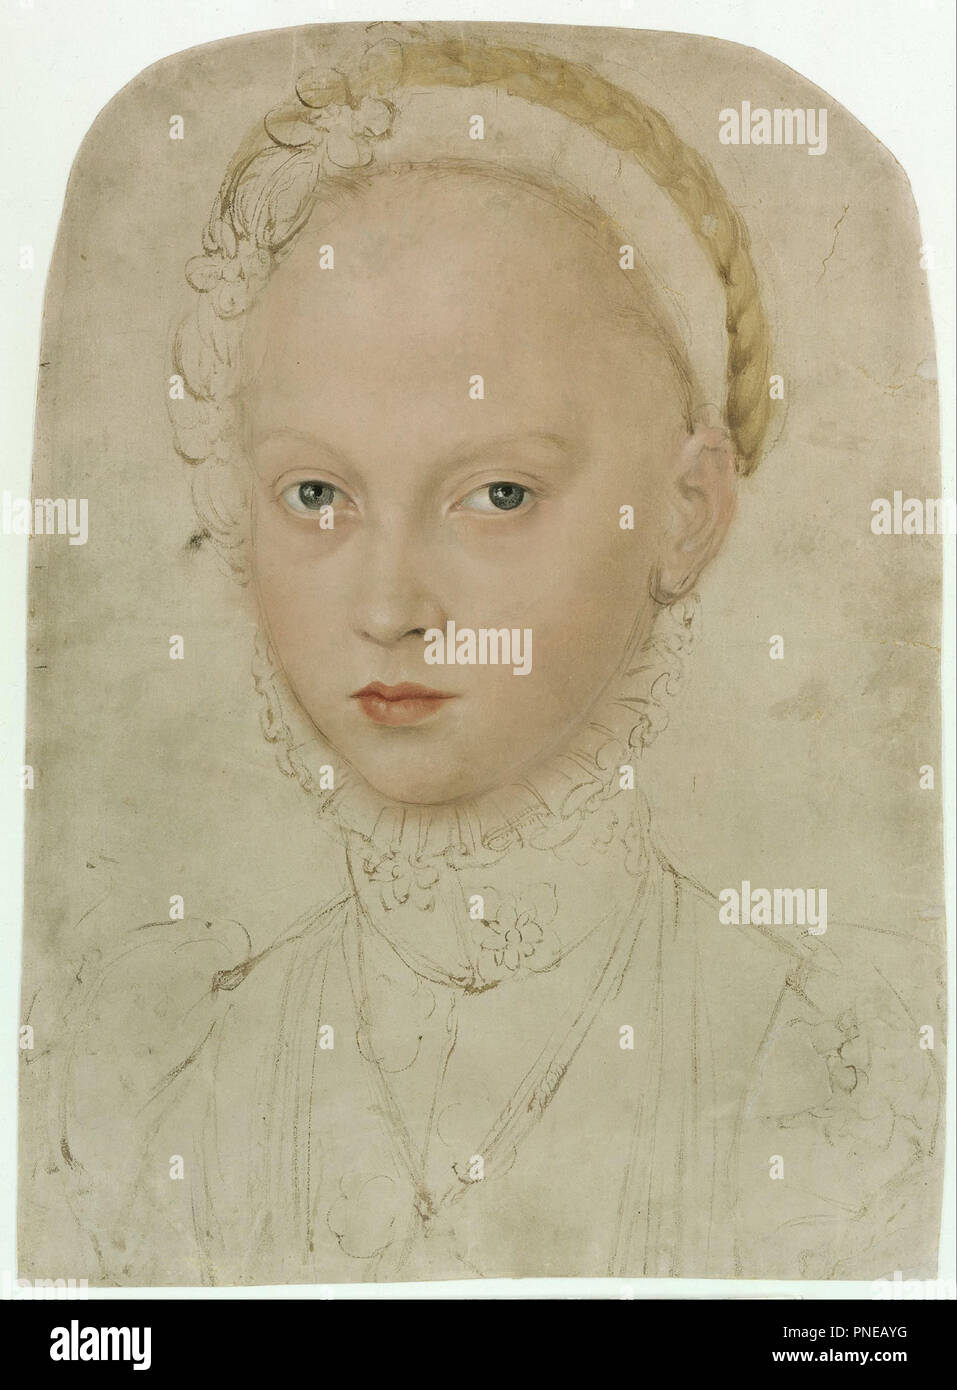 Portrait of Princess Elisabeth of Saxony. Date/Period: 1564. Paper. Brush, sketched in brown, face and plait of hair executed in oils; paper prepared with light pink oil paint Brush, sketched in brown, face and plait of hair executed in oils; paper prepared with light pink oil paint. Height: 388 mm (15.27 in); Width: 285 mm (11.22 in). Author: Lucas Cranach the Younger. LUCAS CRANACH, THE YOUNGER. CRANACH, LUCAS THE YOUNGER. Stock Photo